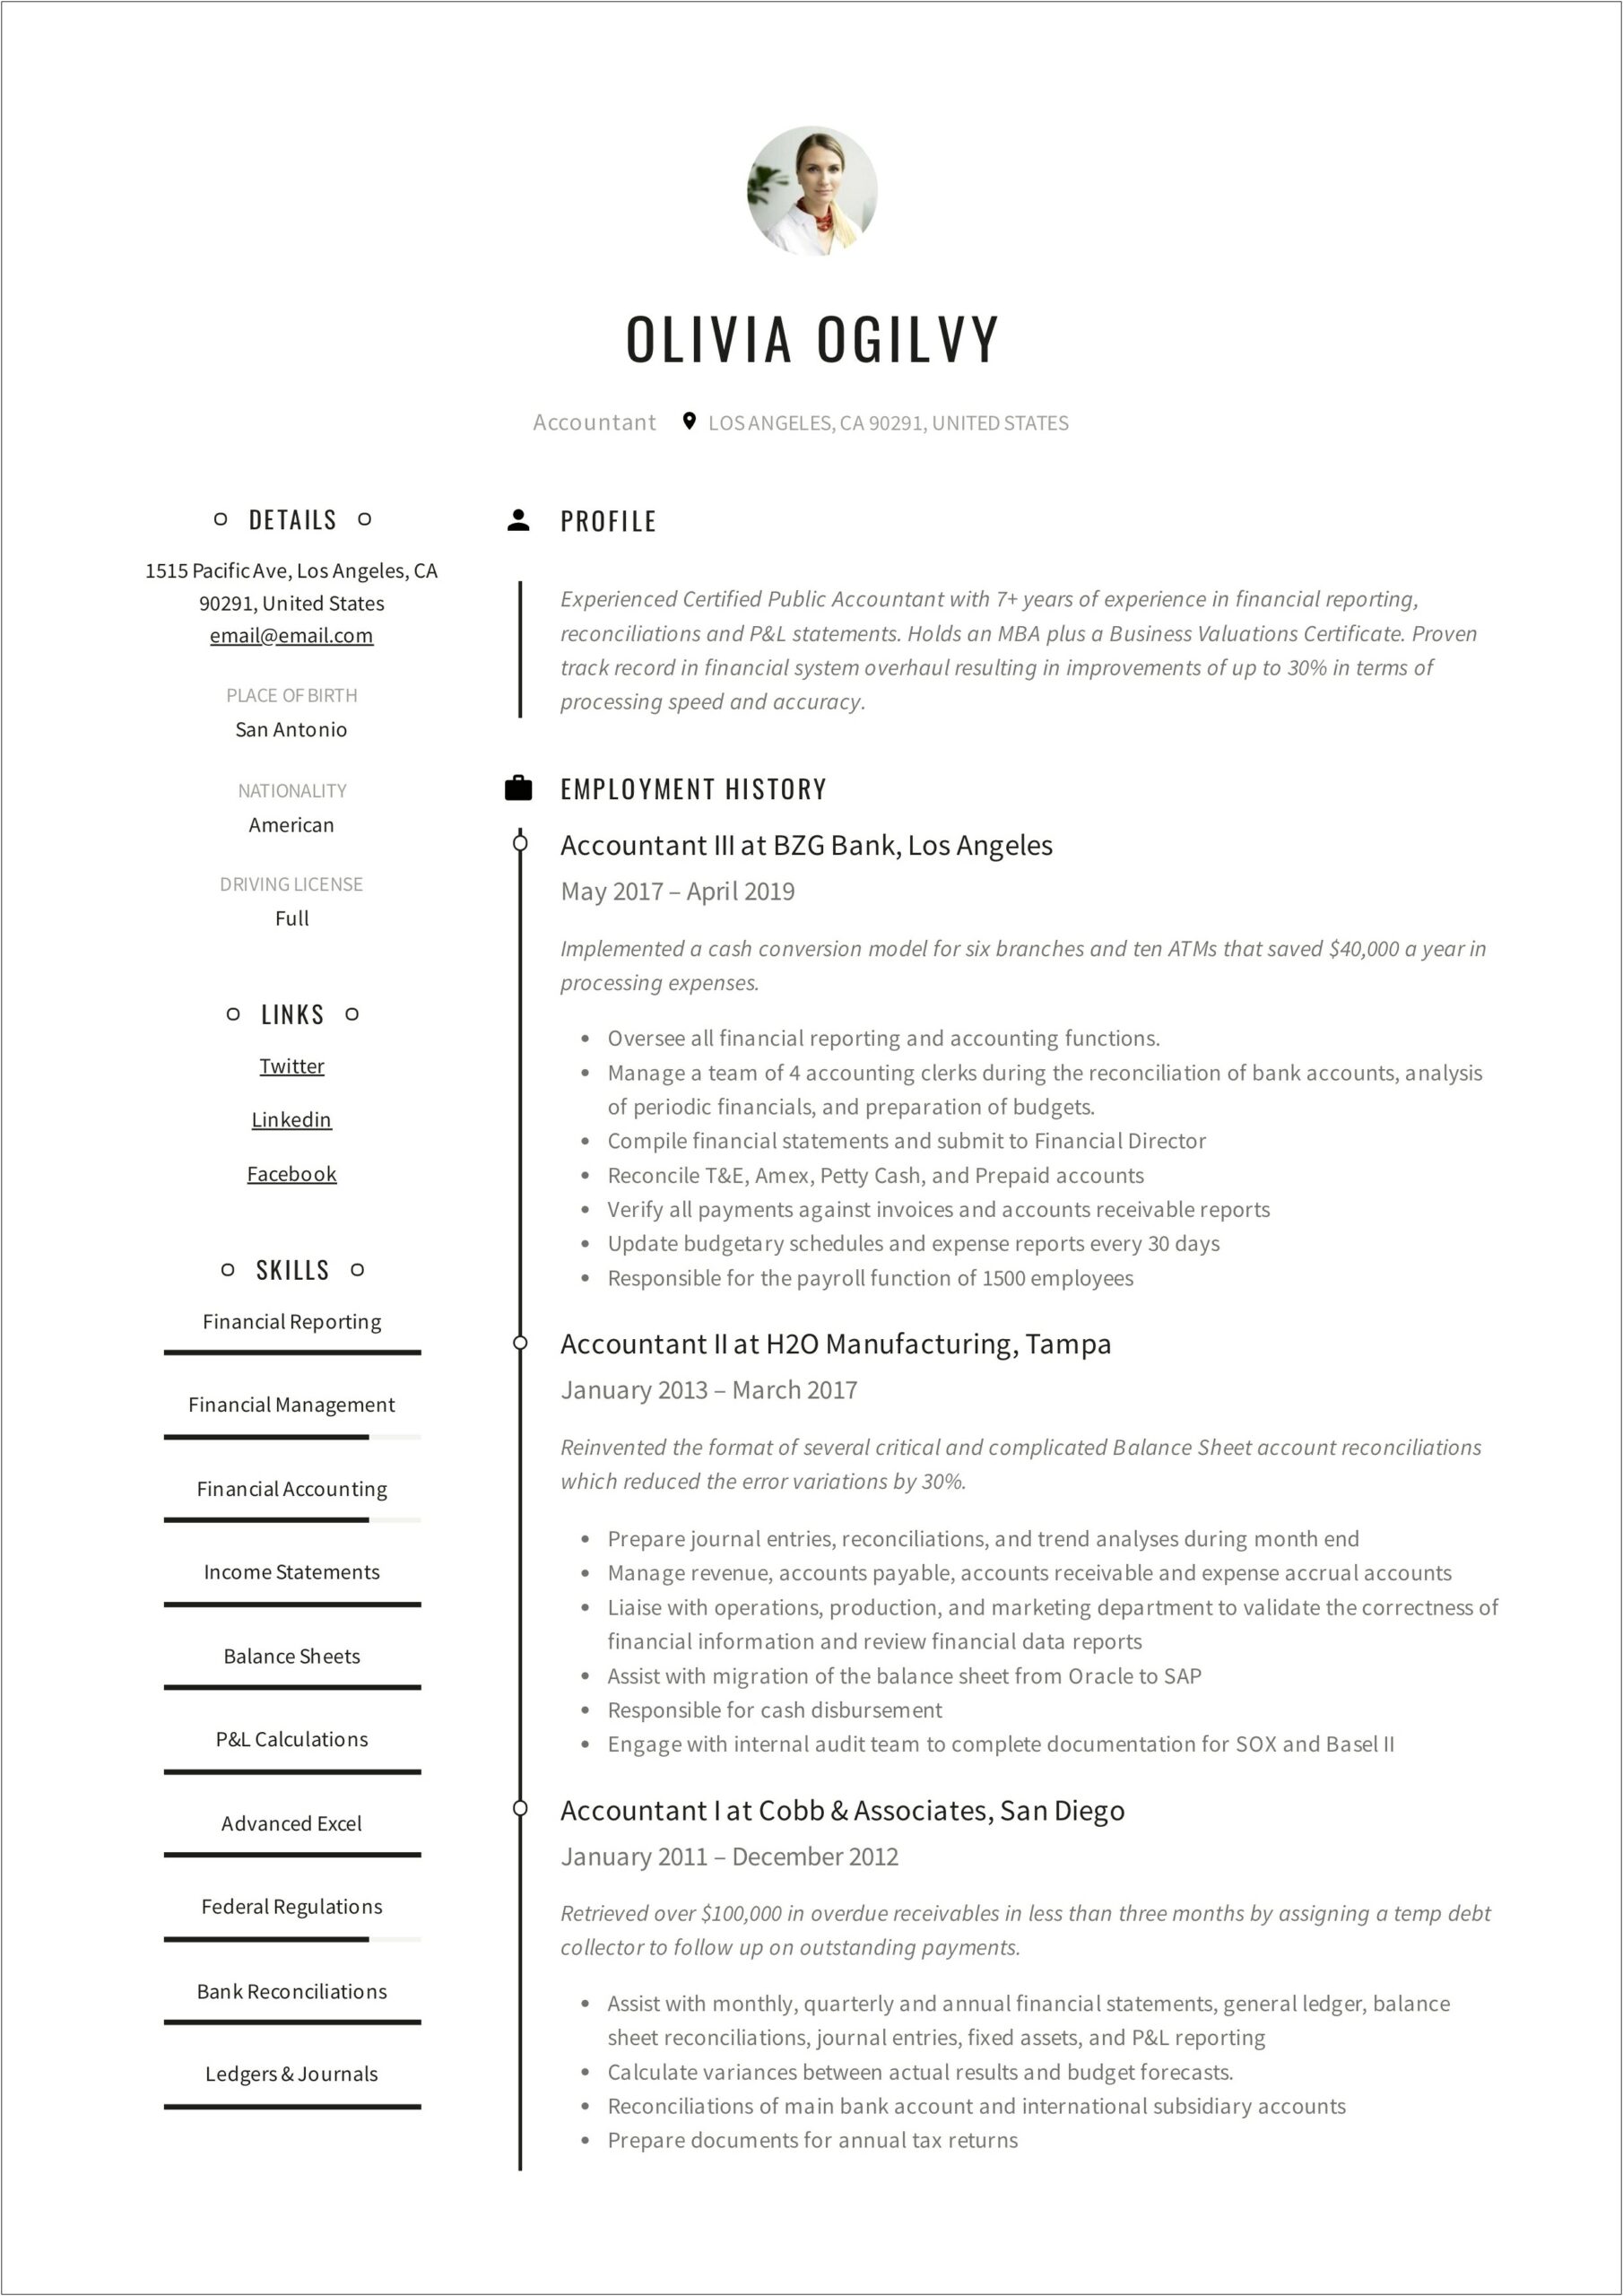 Resume Value Statement Examples Cpa